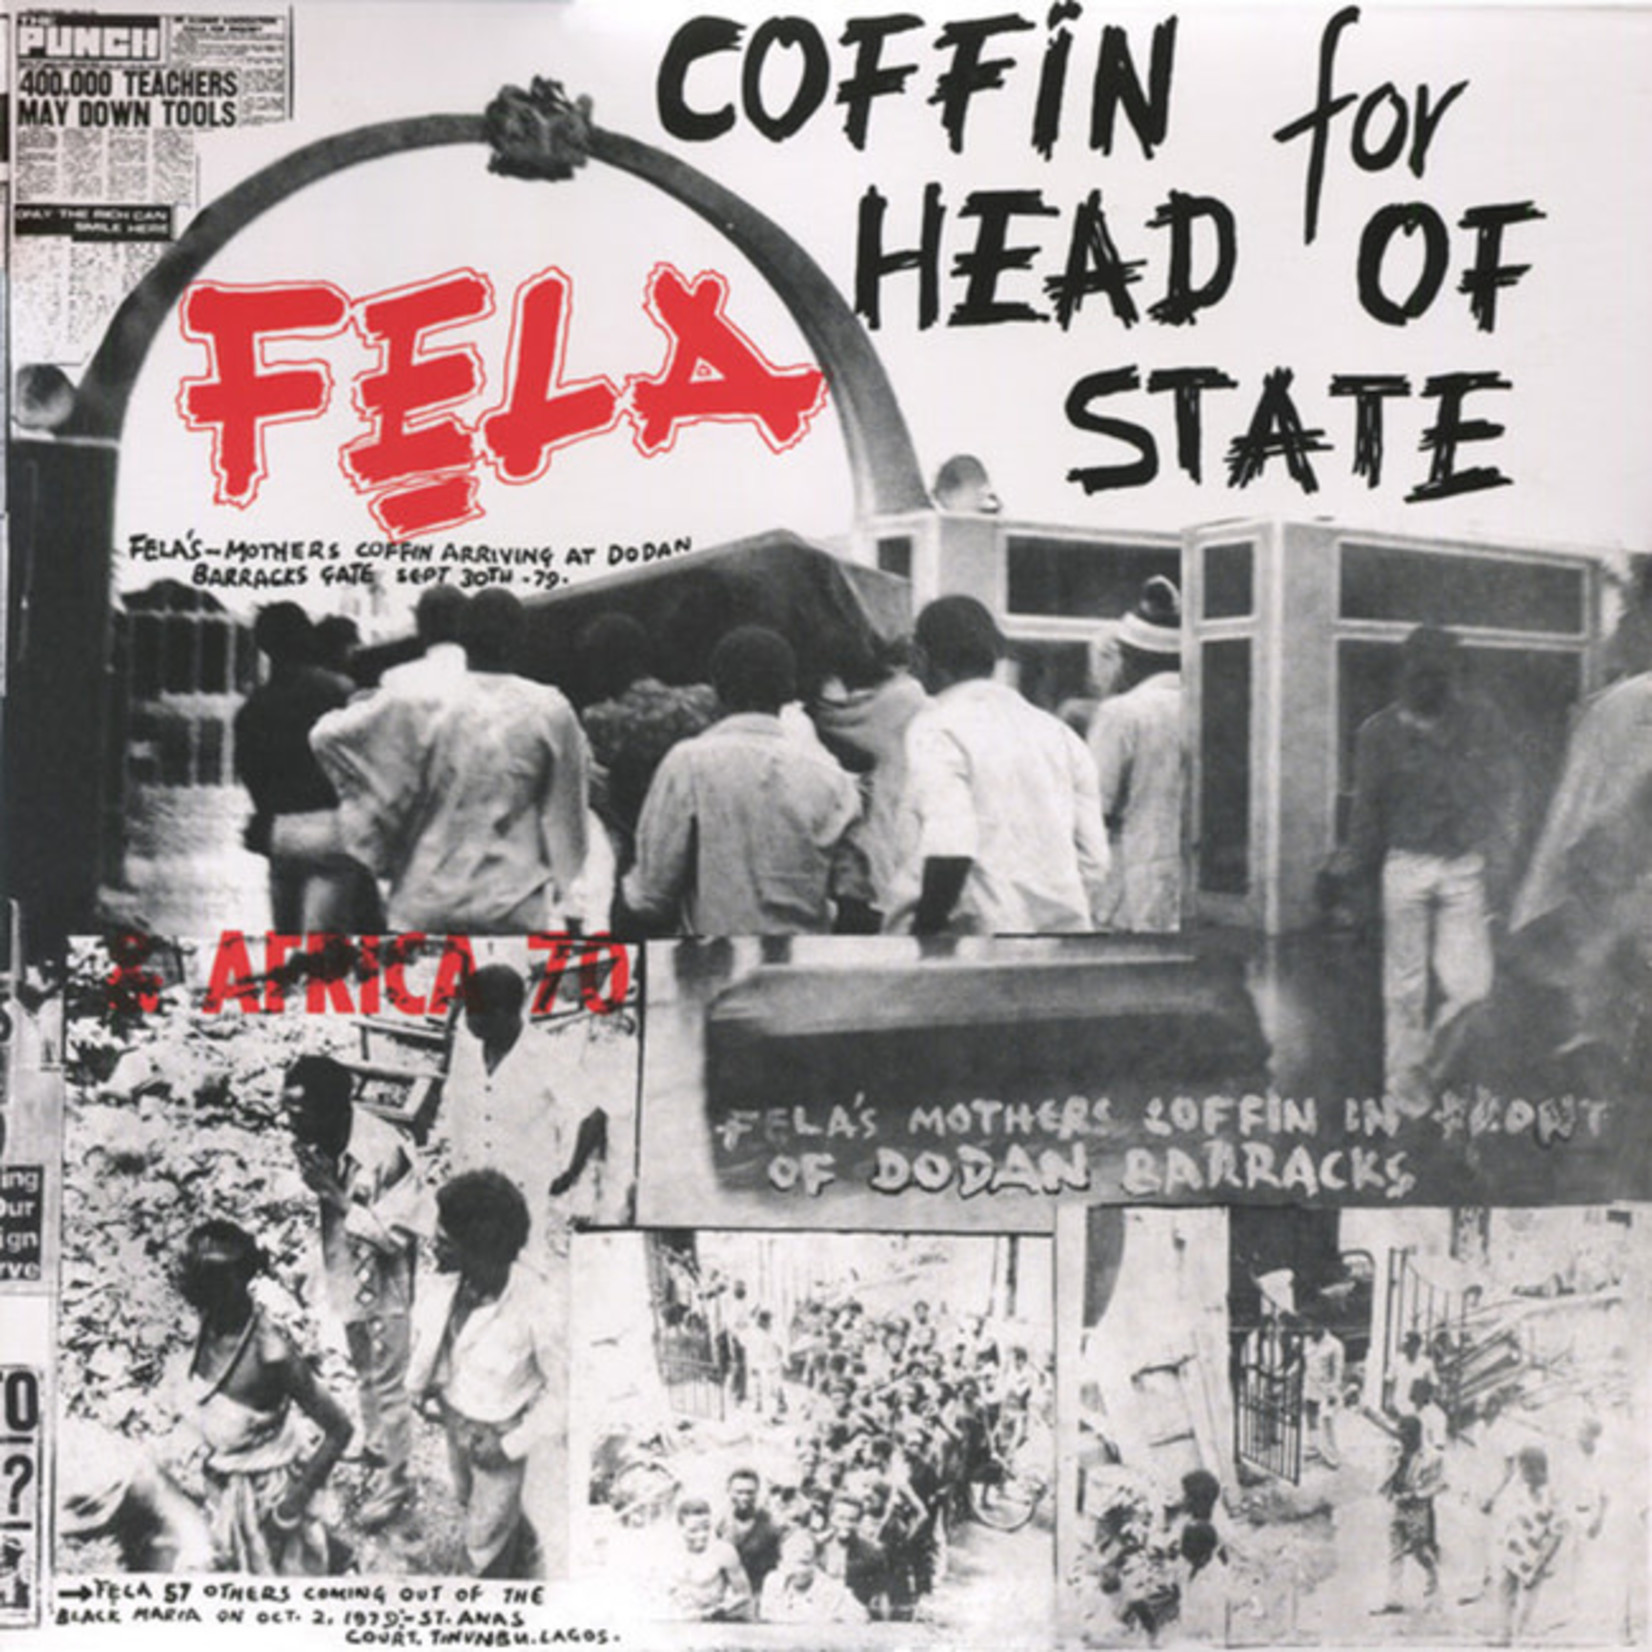 [New] Fela Kuti - Coffin For Head Of State